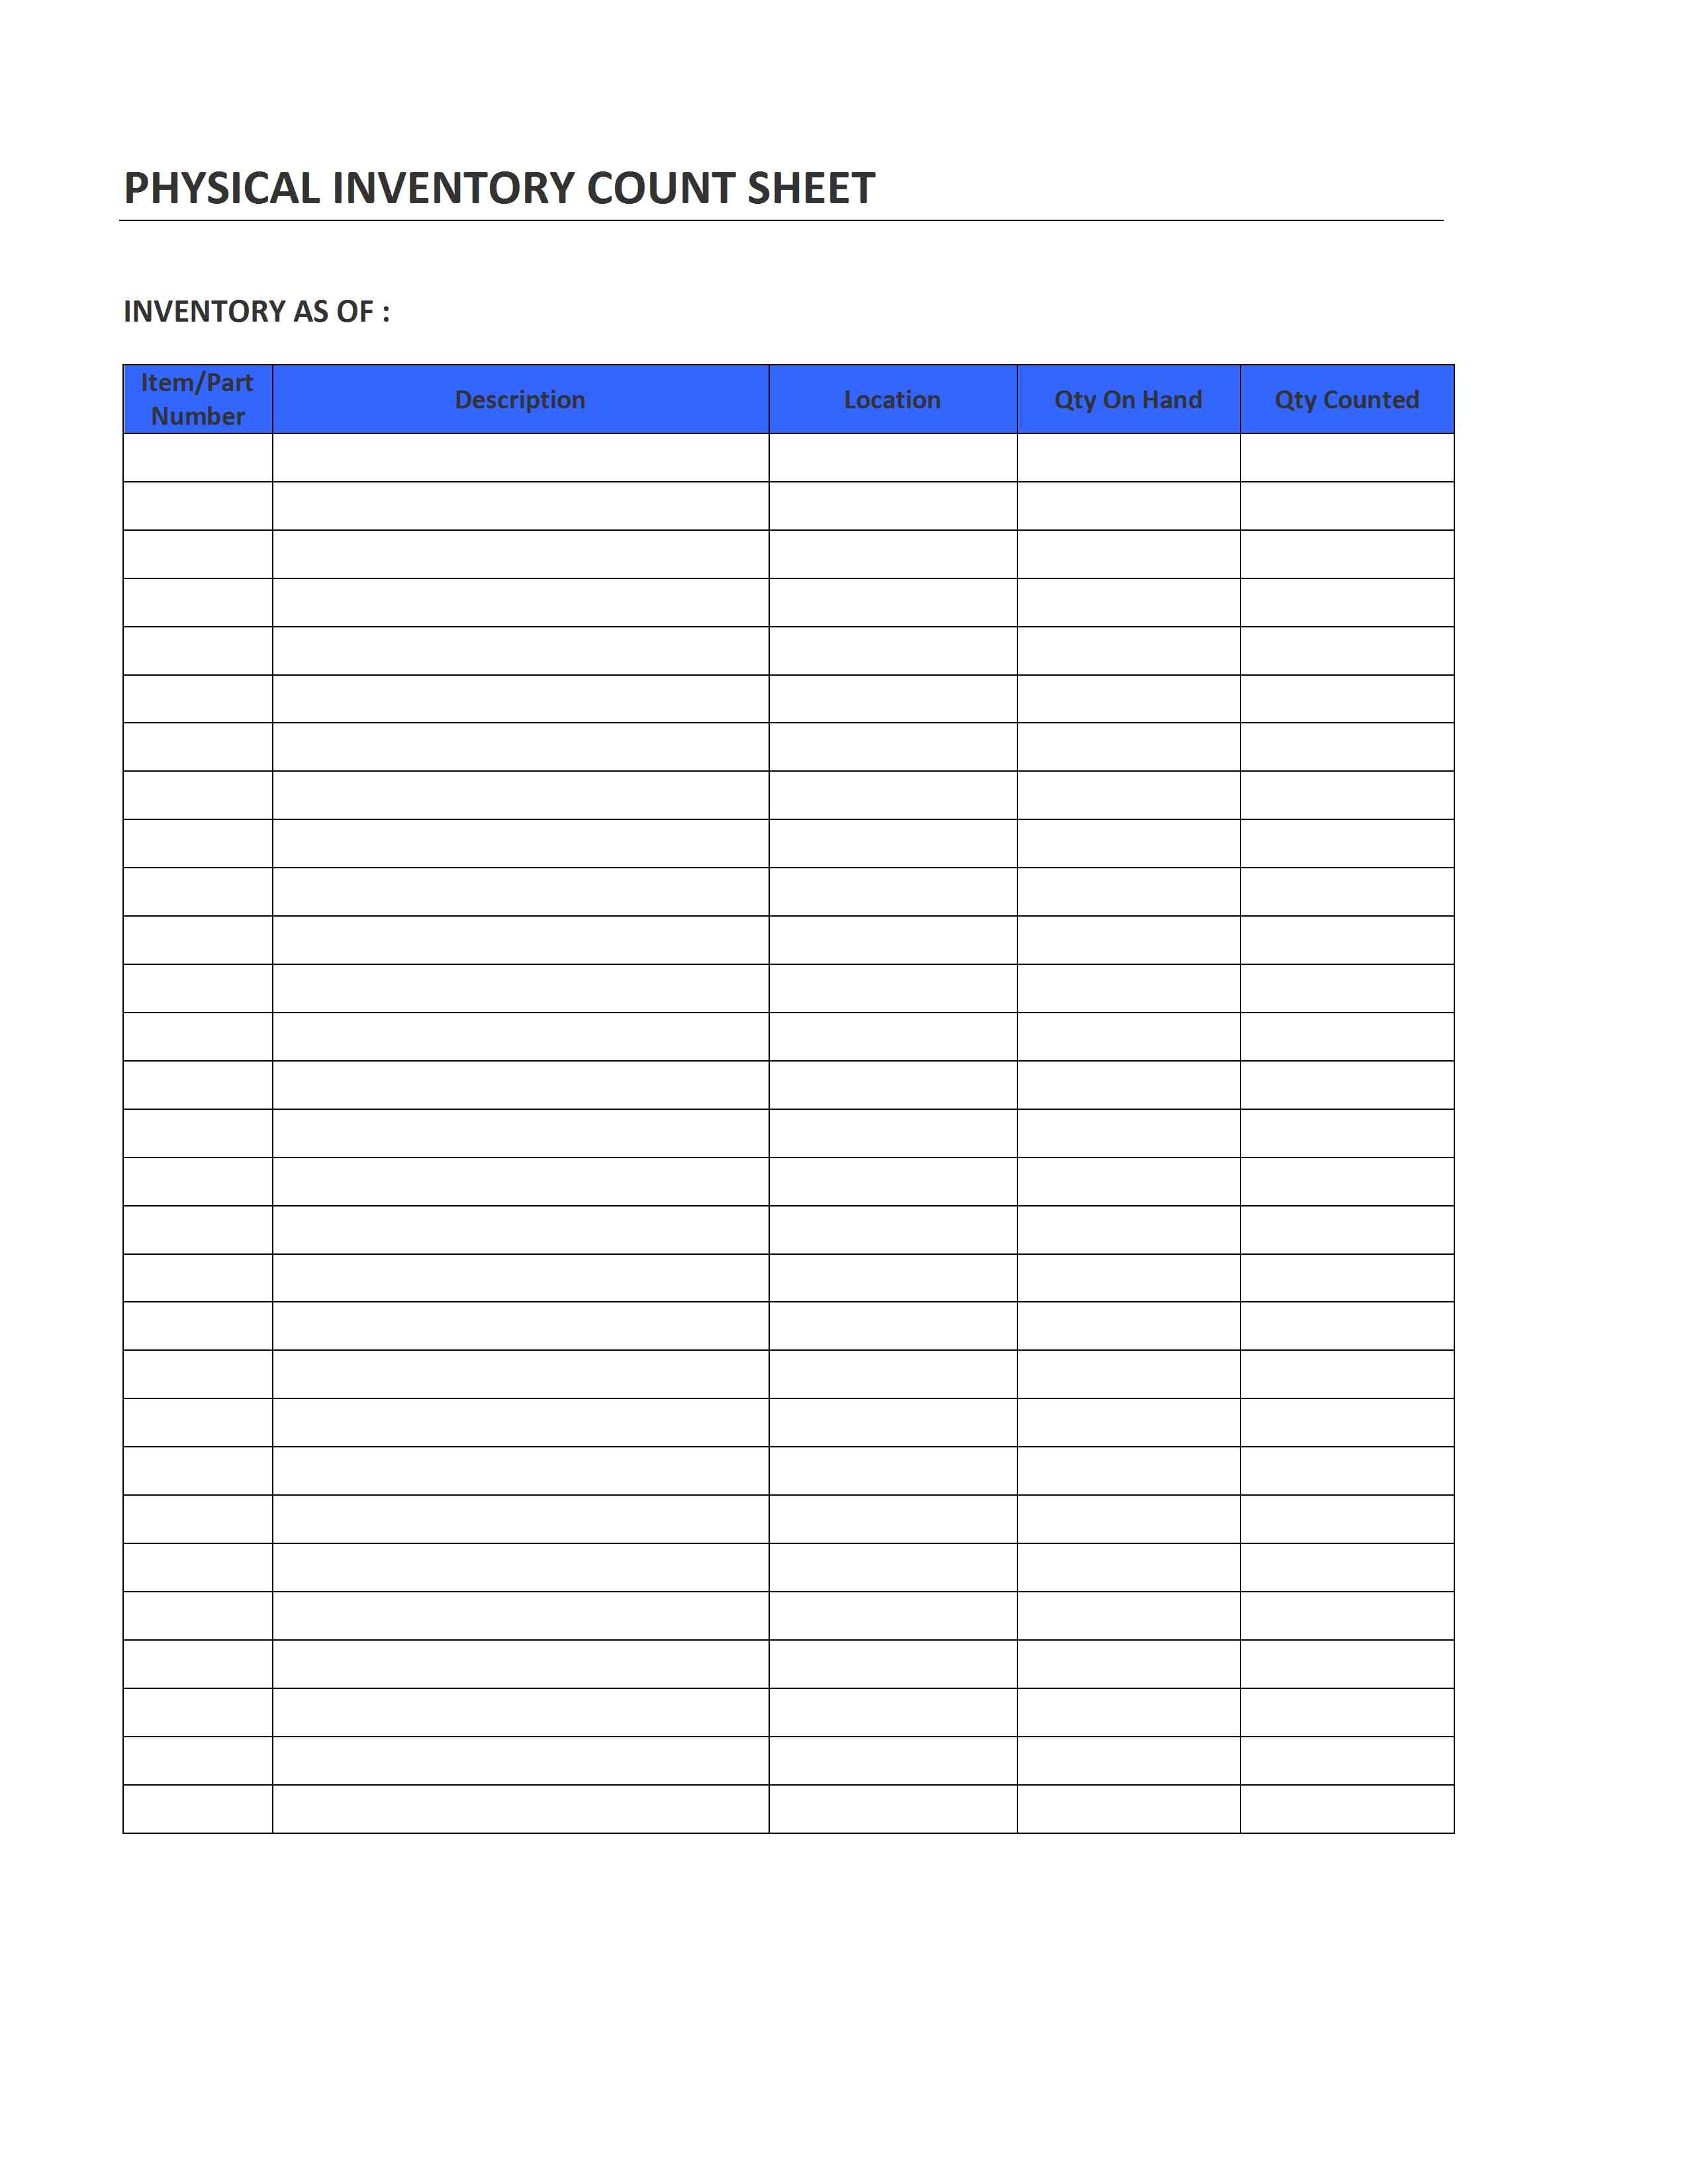 physical-inventory-count-sheet-template